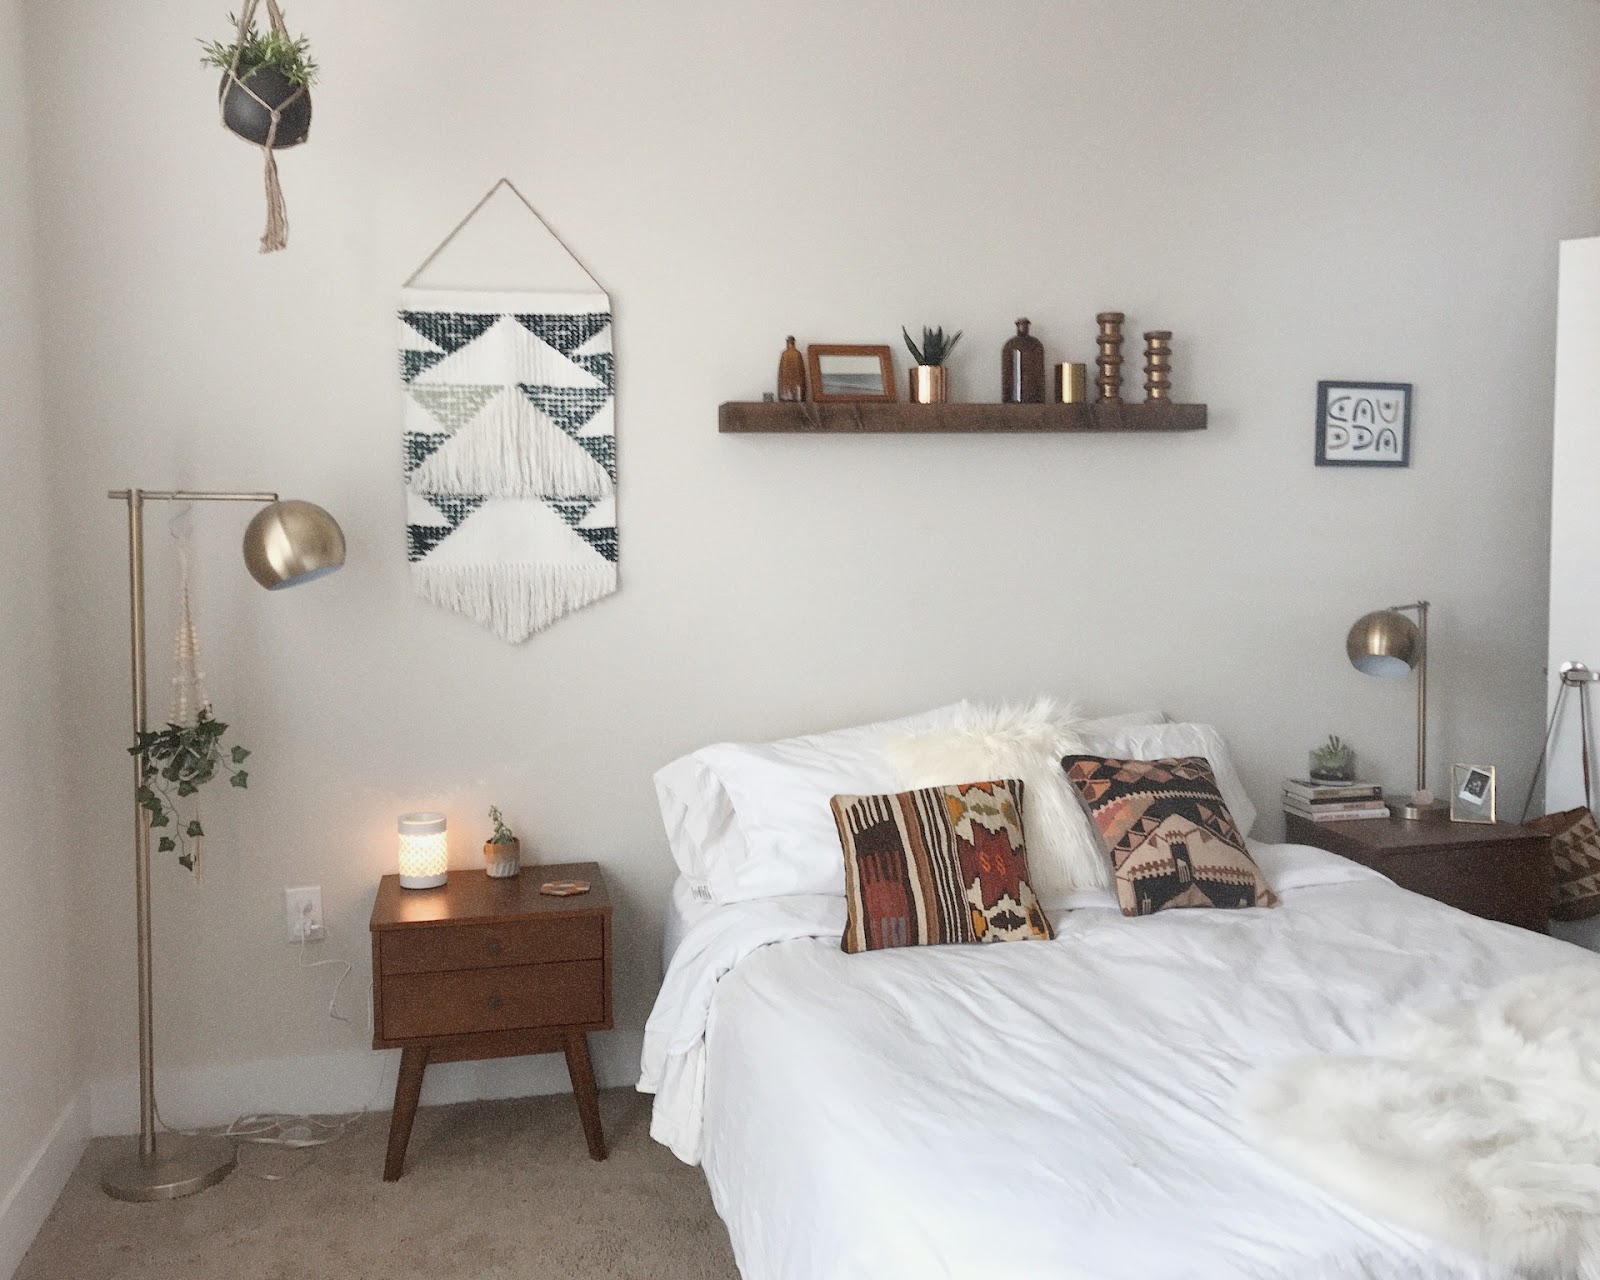 Bedroom | a little peak into my space | Darling Greyhound